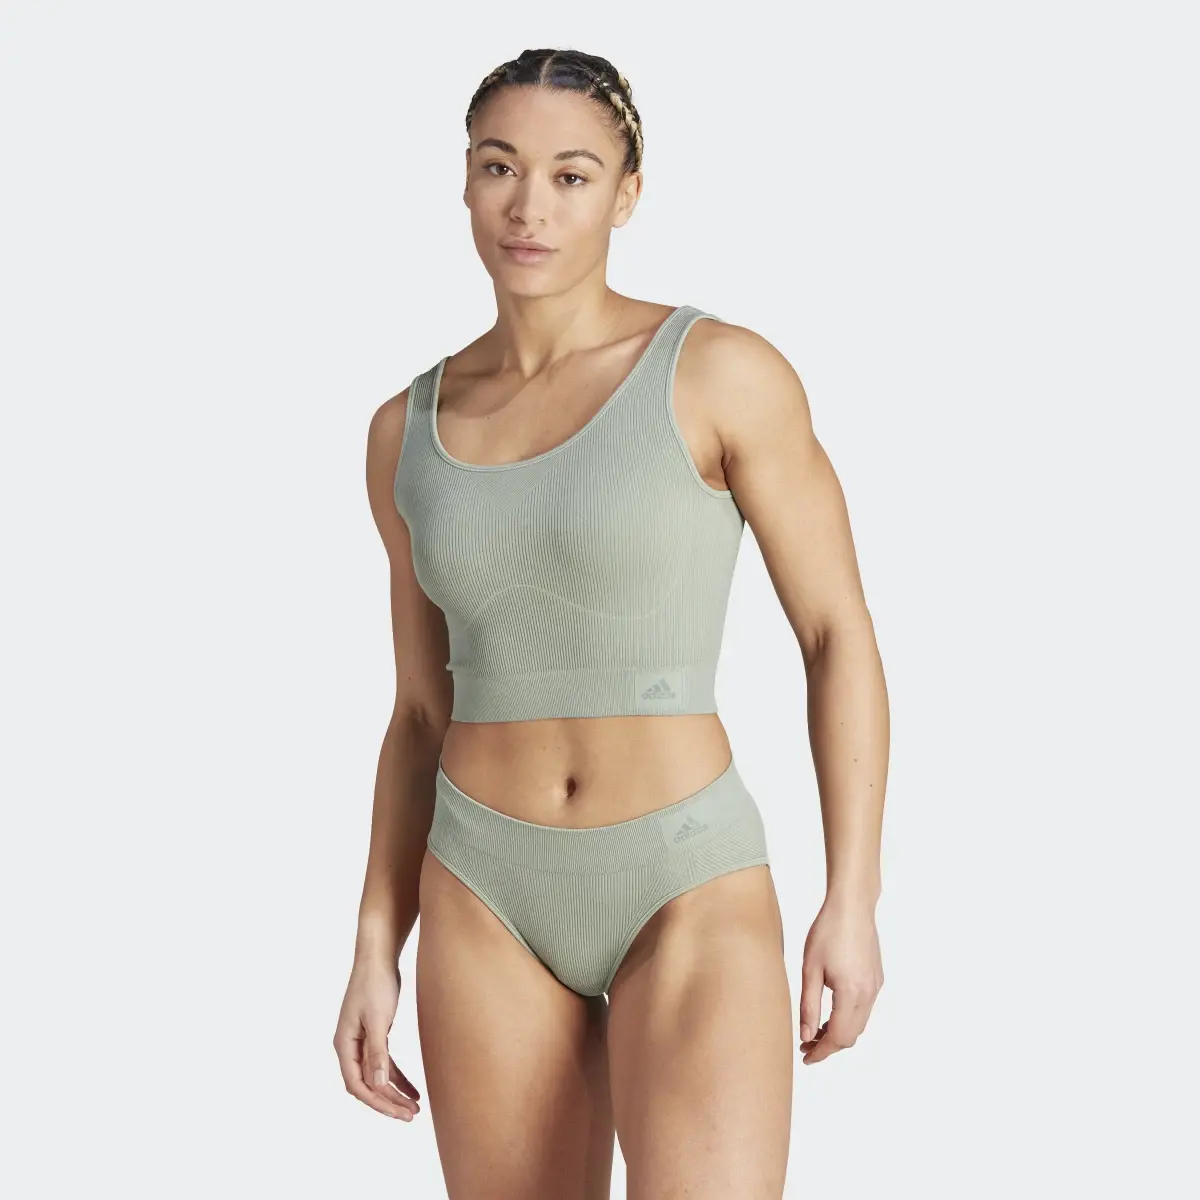 Adidas Ribbed Active Seamless Cropped Tank Top Underwear. 2